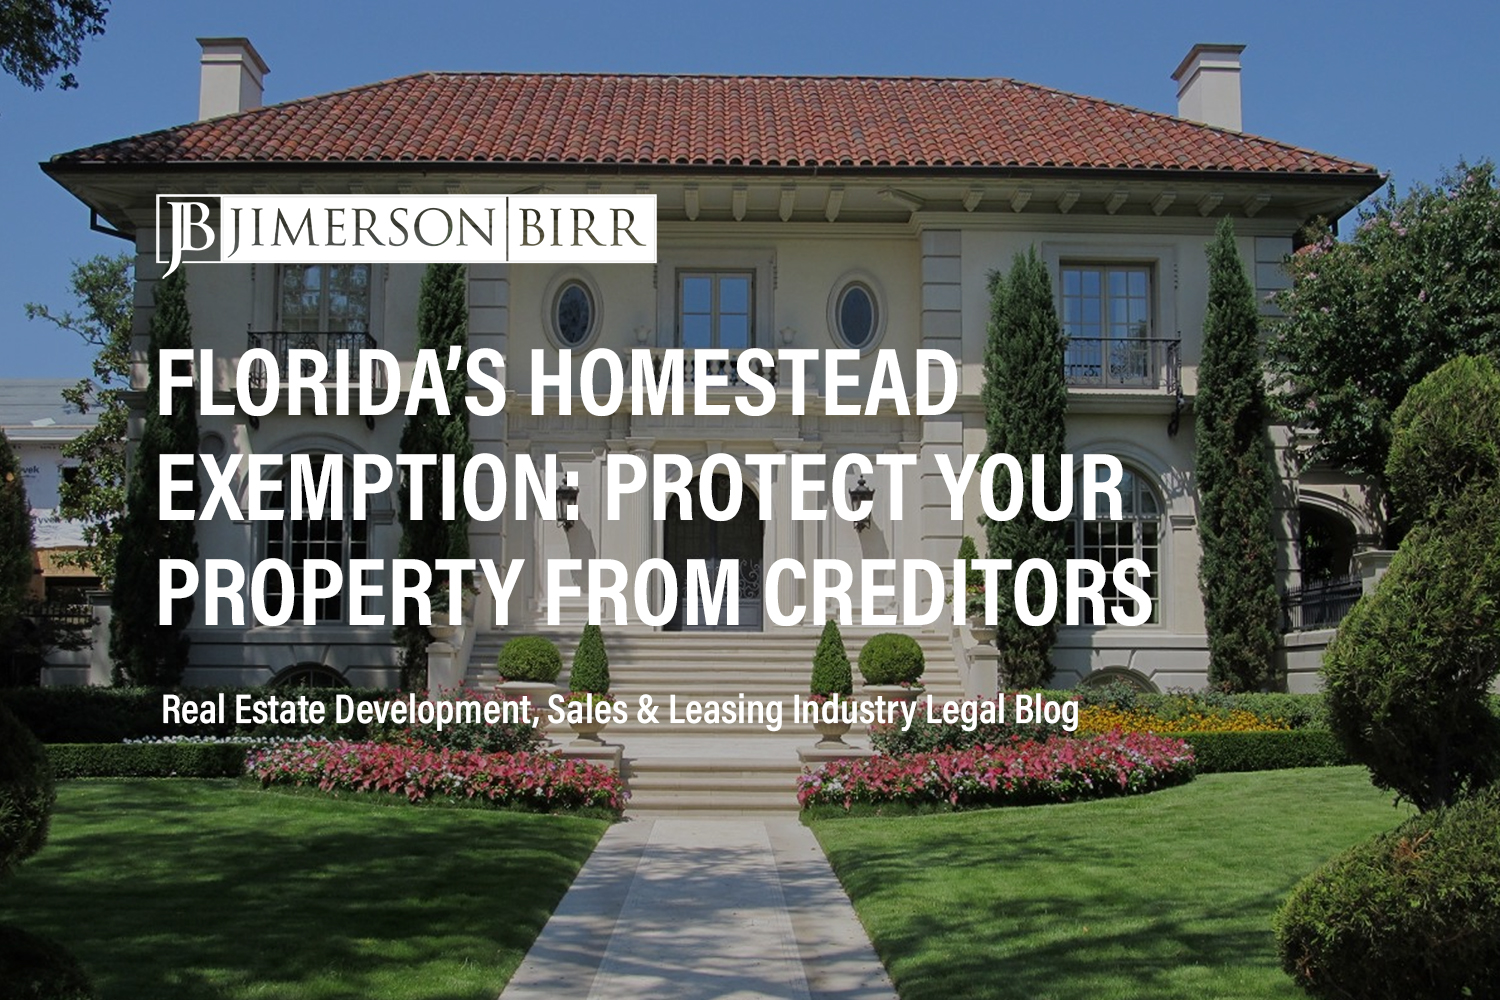 Using Florida’s Homestead Exemption to Reduce Your Property Taxes and Protect Your Property From Creditors